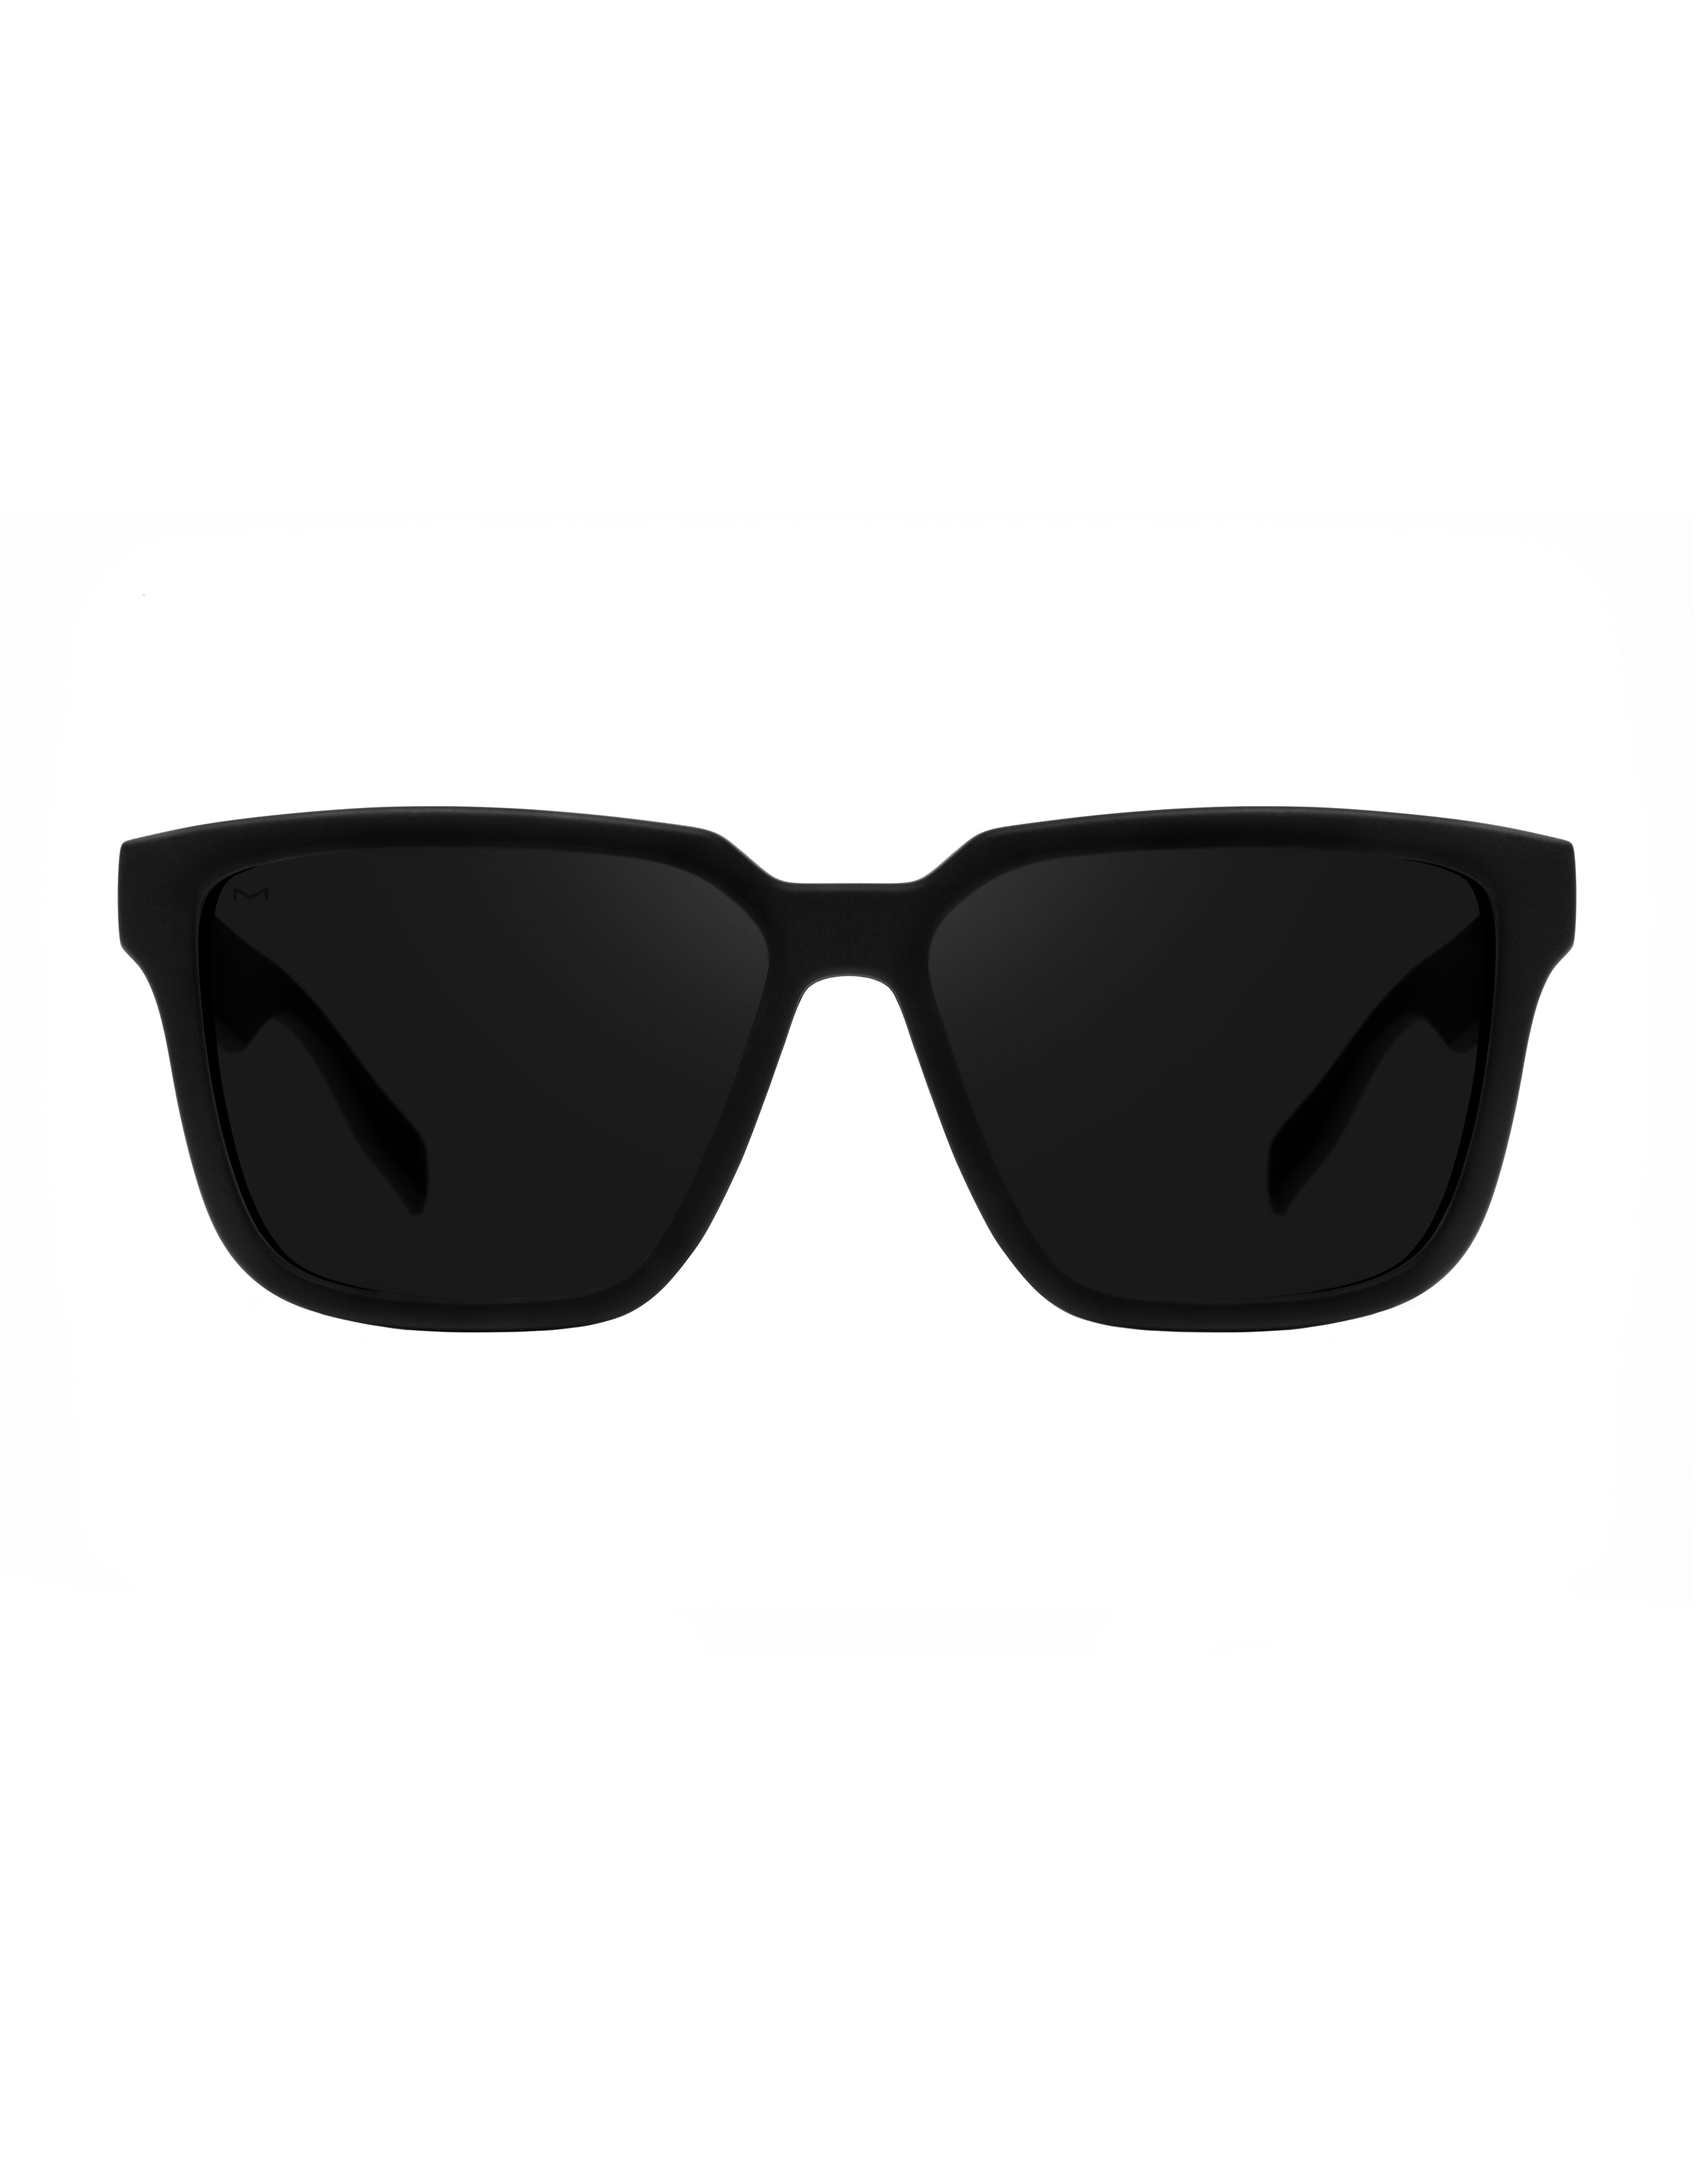 HAWKERS - MOTION Carbon Black Dark For Men and Women UV400